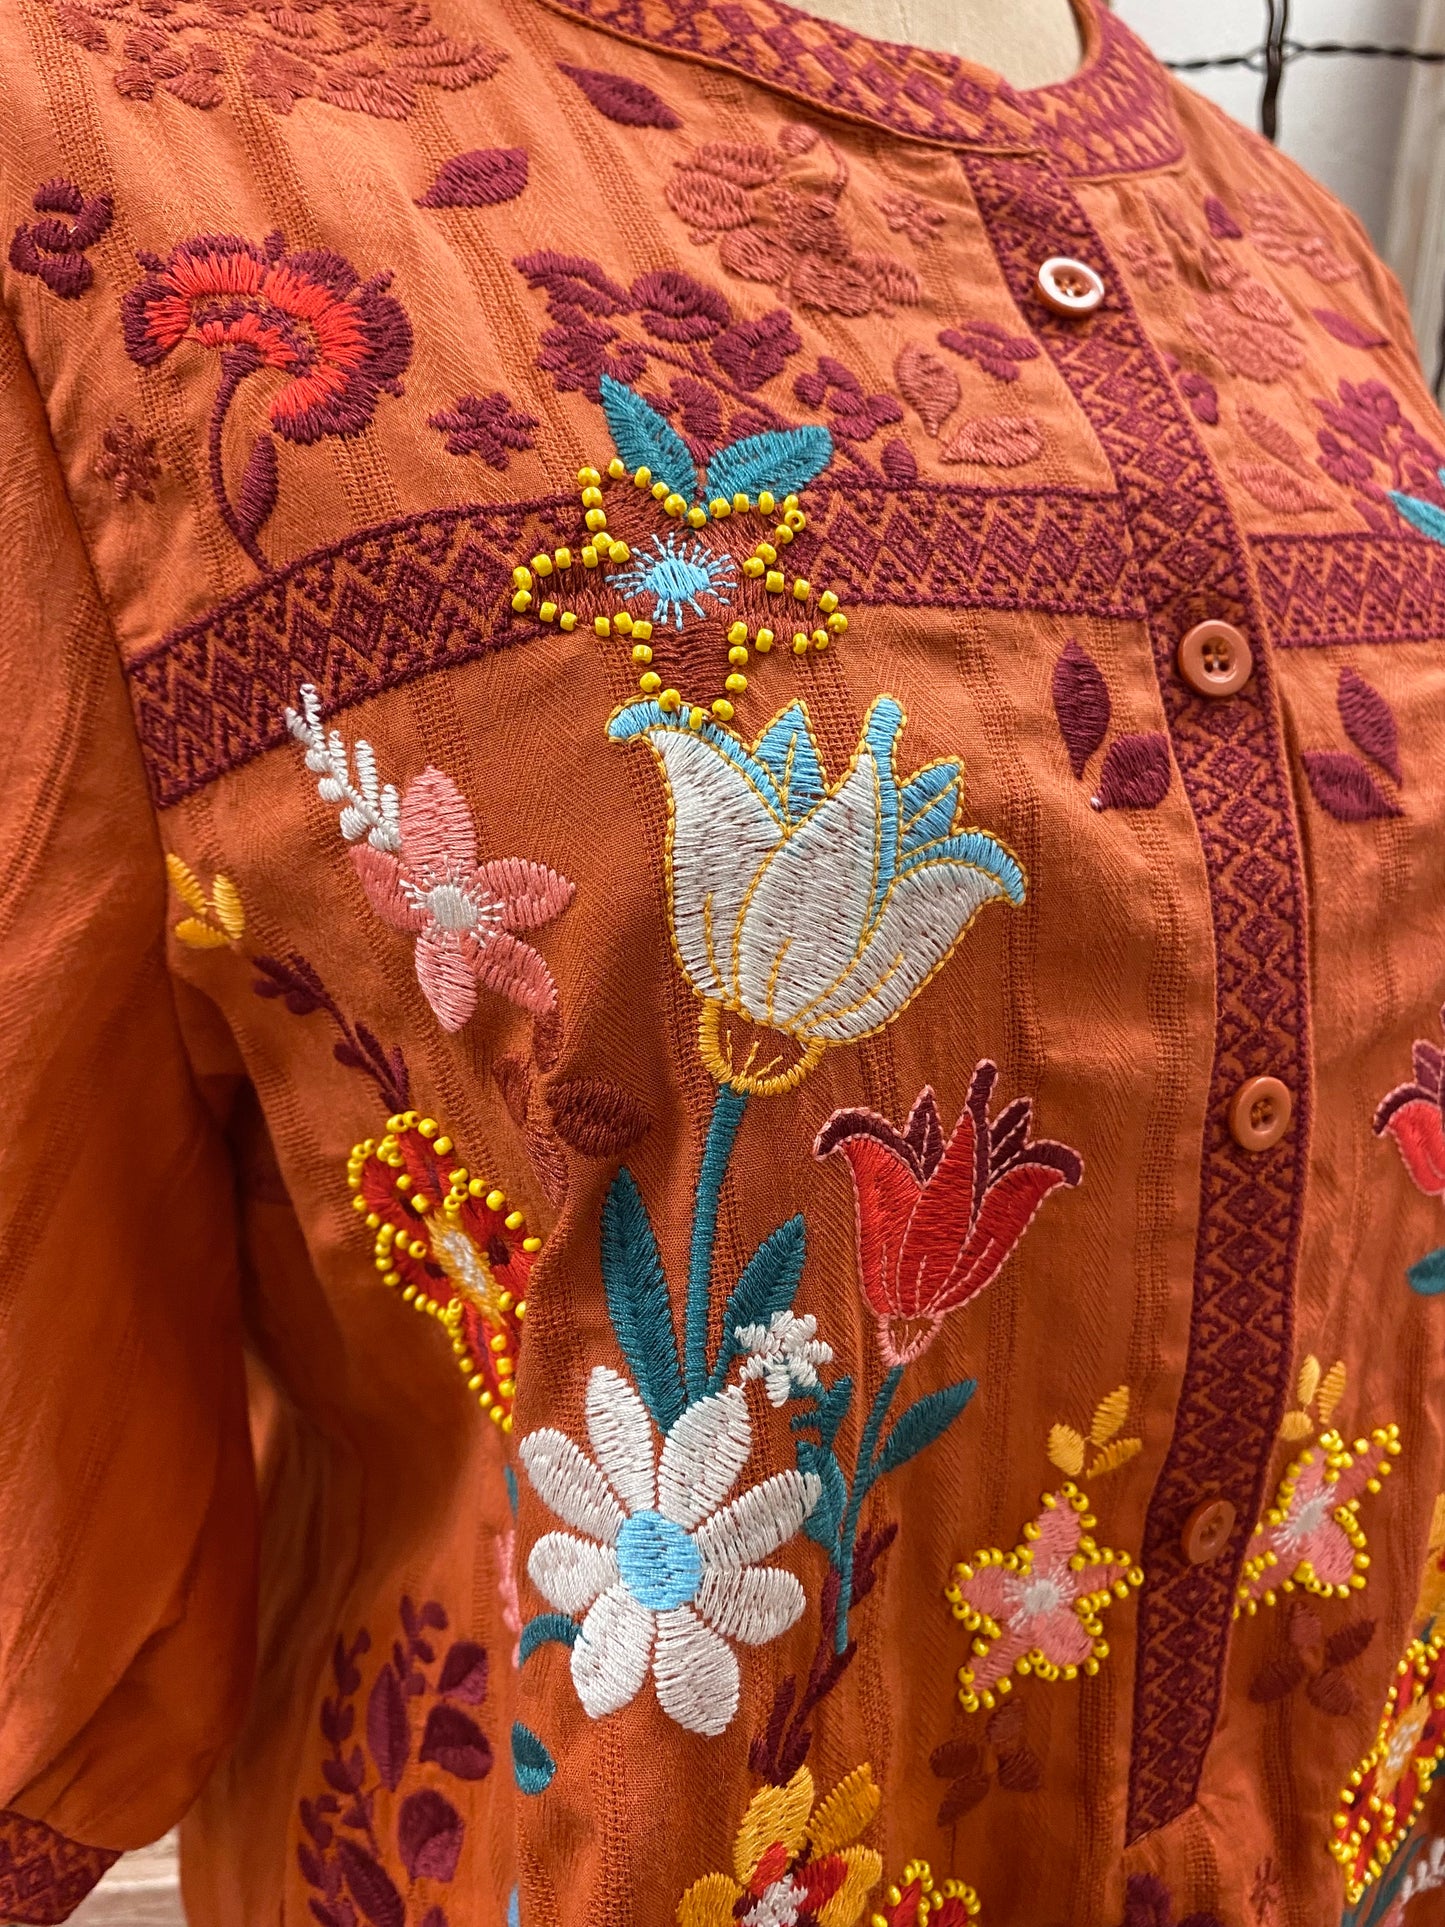 Rust Embroidered Top